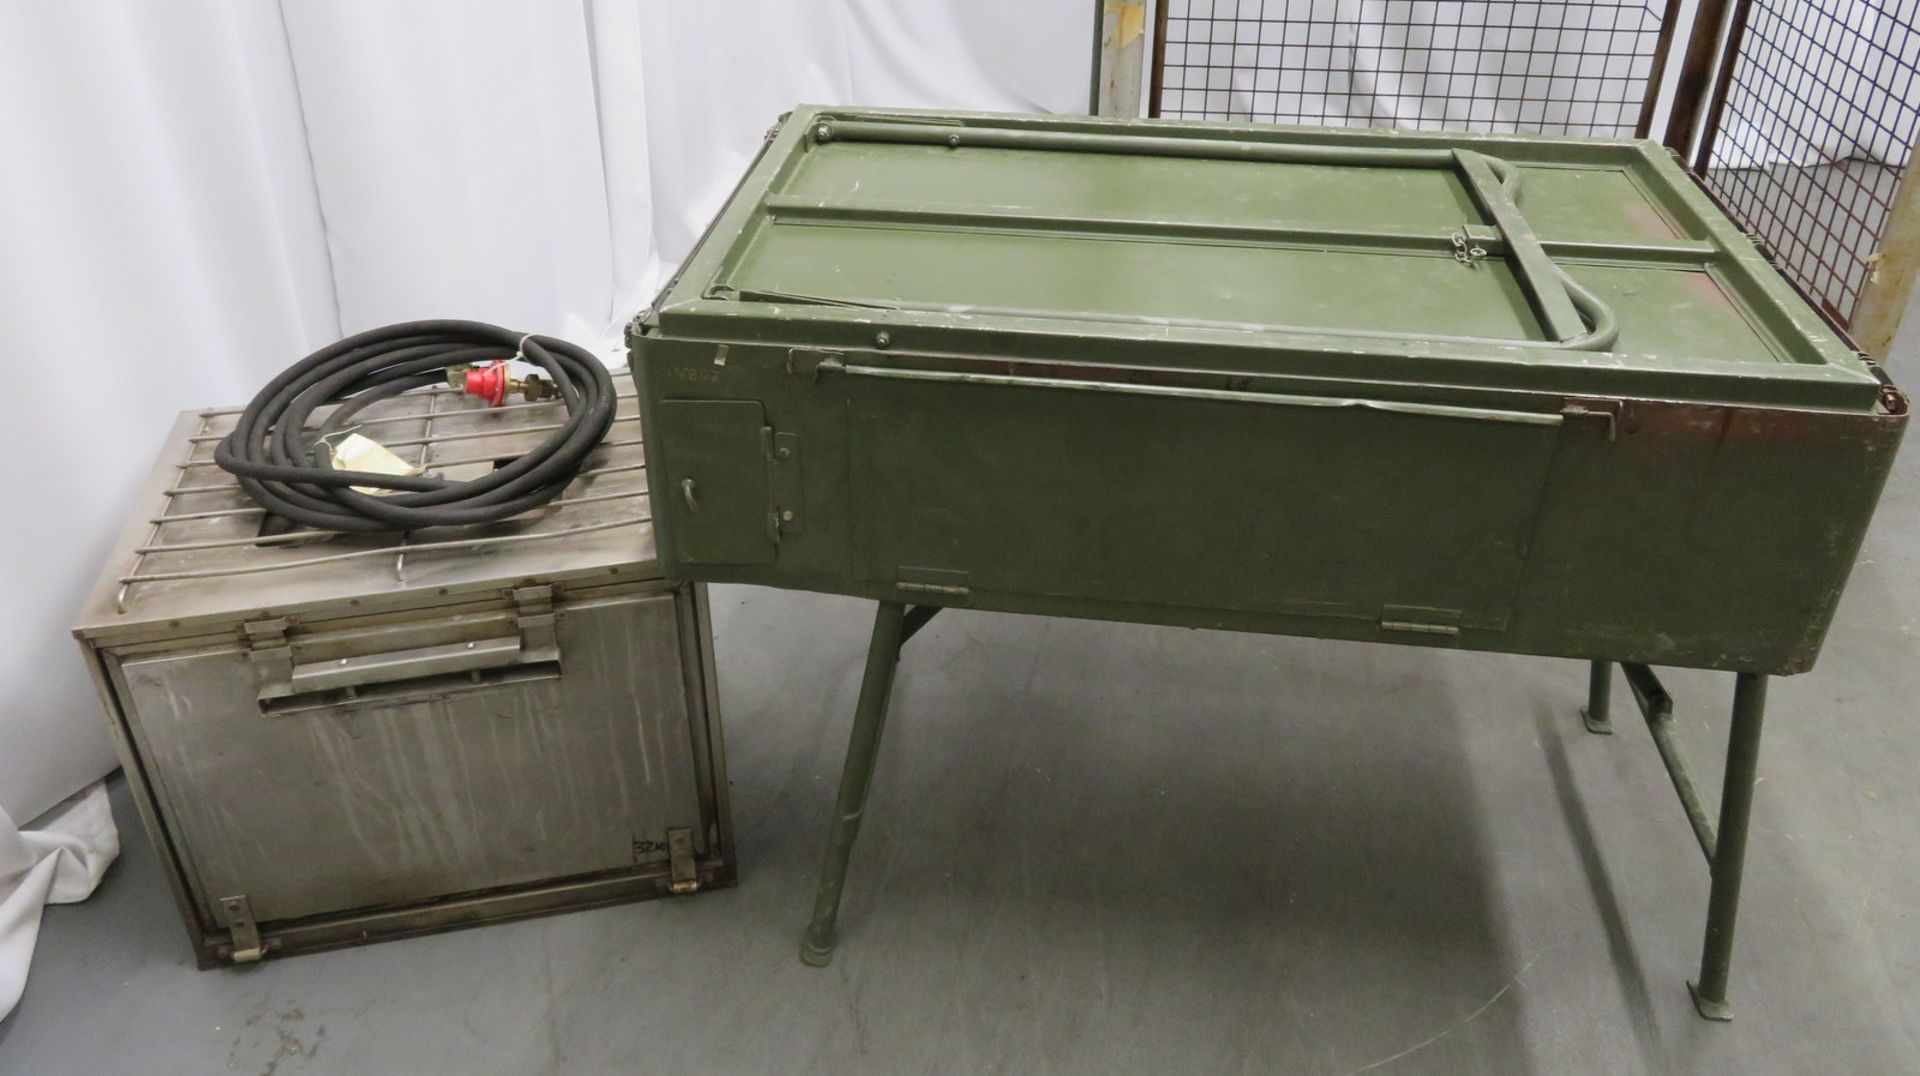 British Army No 5 field cooker & G1 No 5 hot box field oven set. - Image 16 of 16